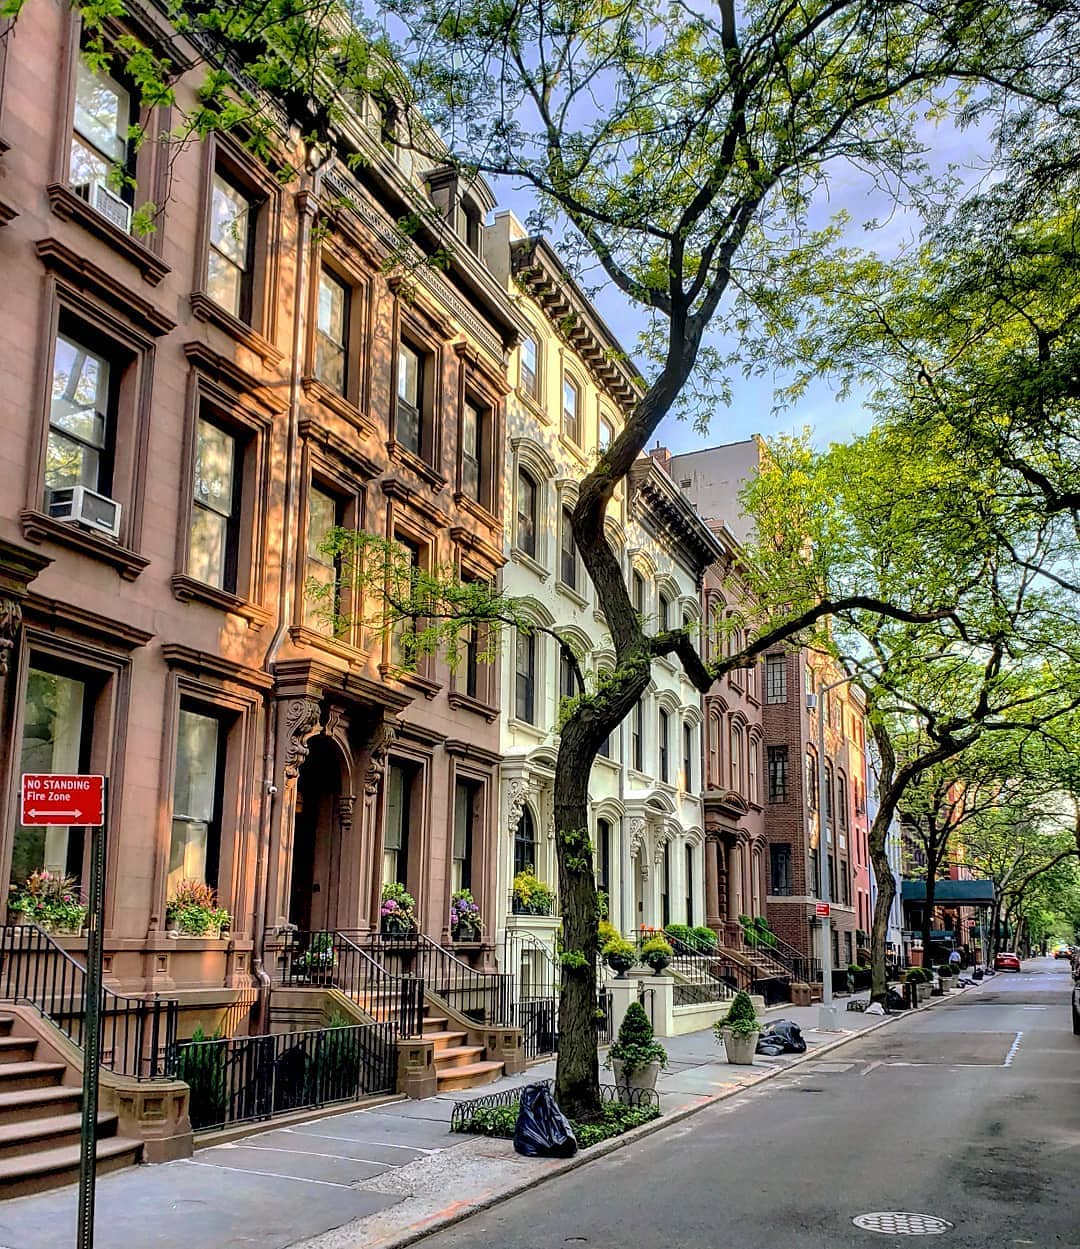 Light and dark-colored brownstone homes. Photo by Instagram user @qwqw7575